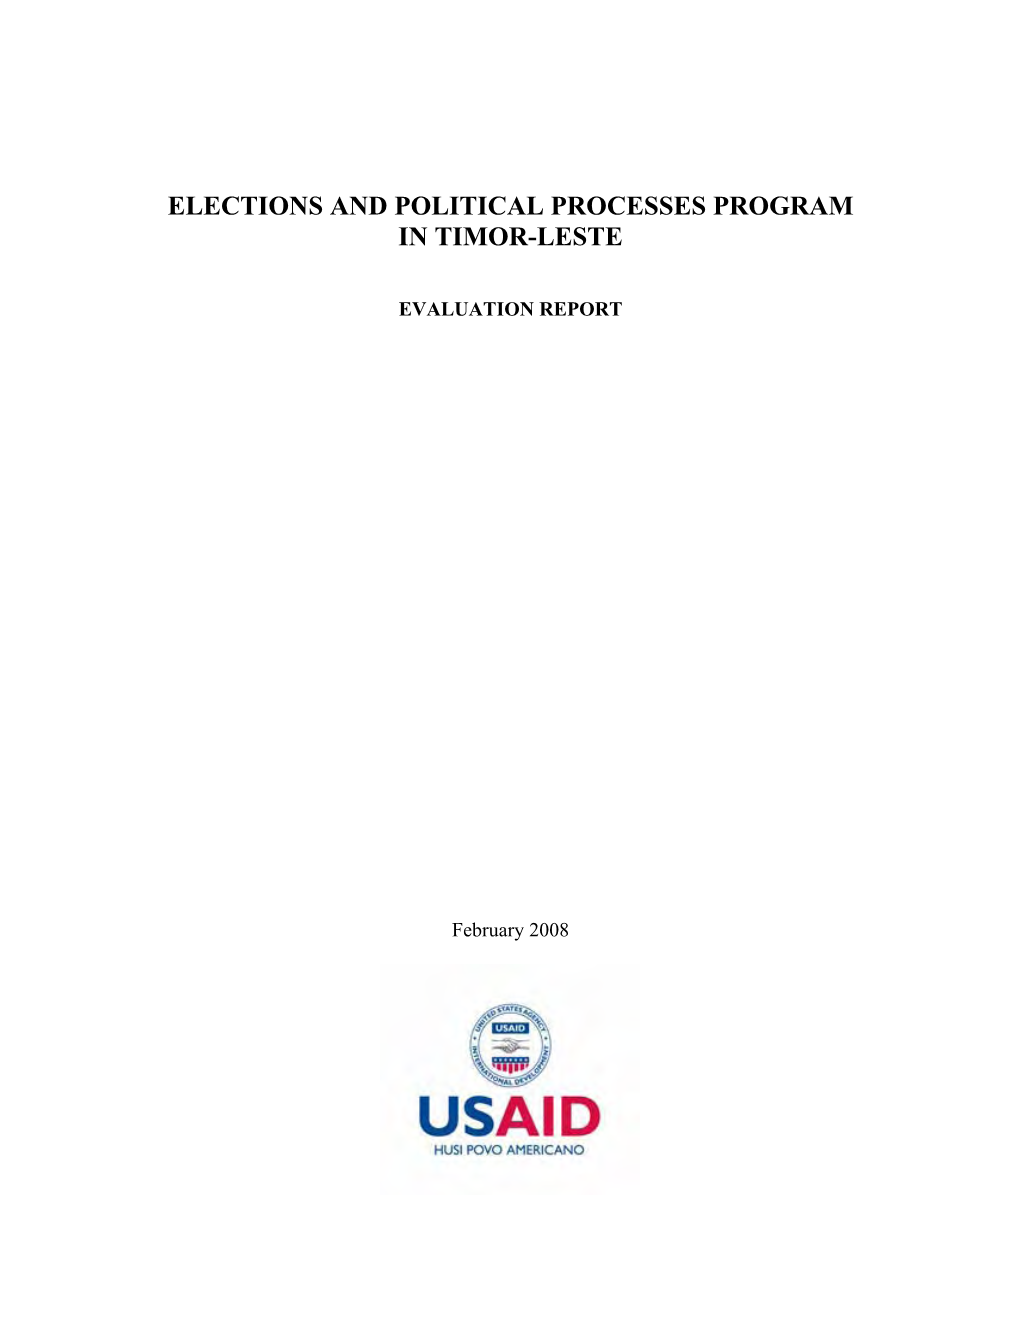 Elections and Political Processes Program in Timor-Leste